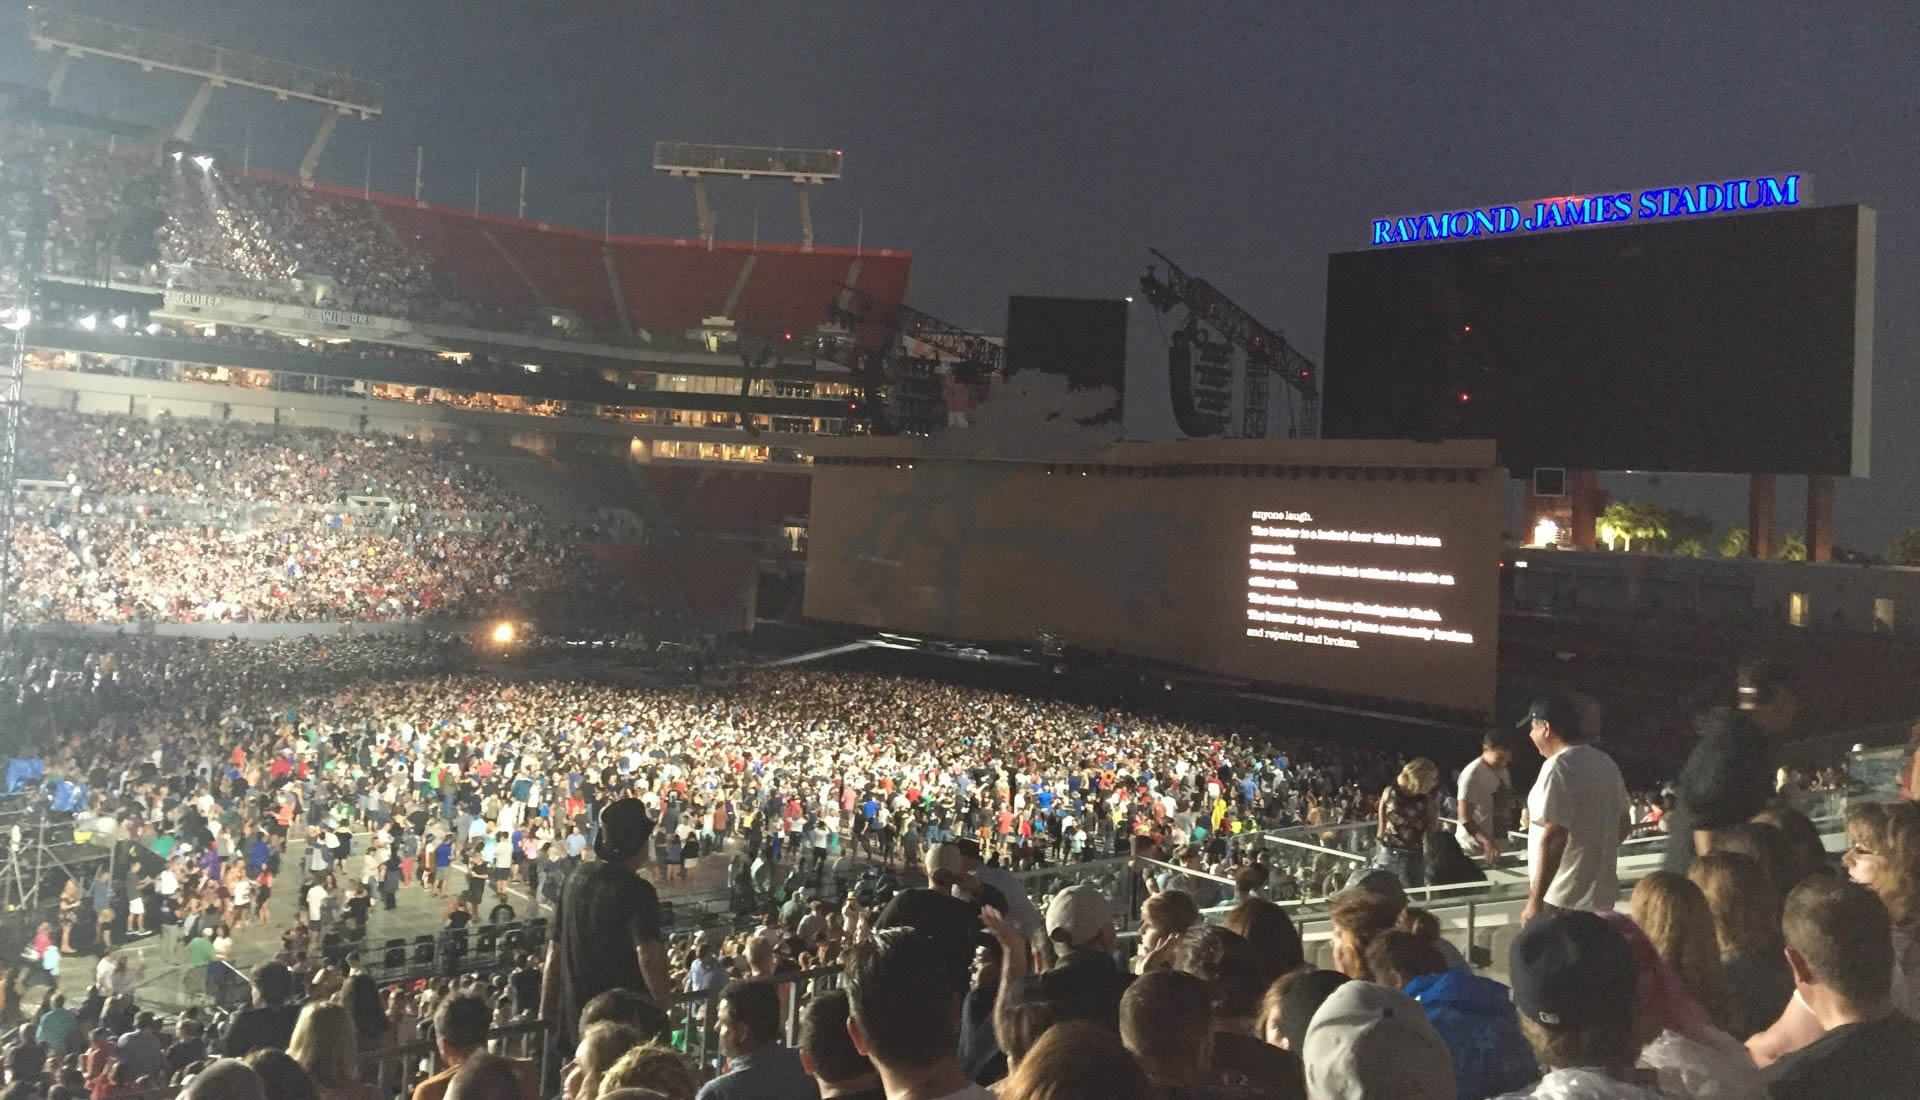 section 210 seat view  for concert - raymond james stadium